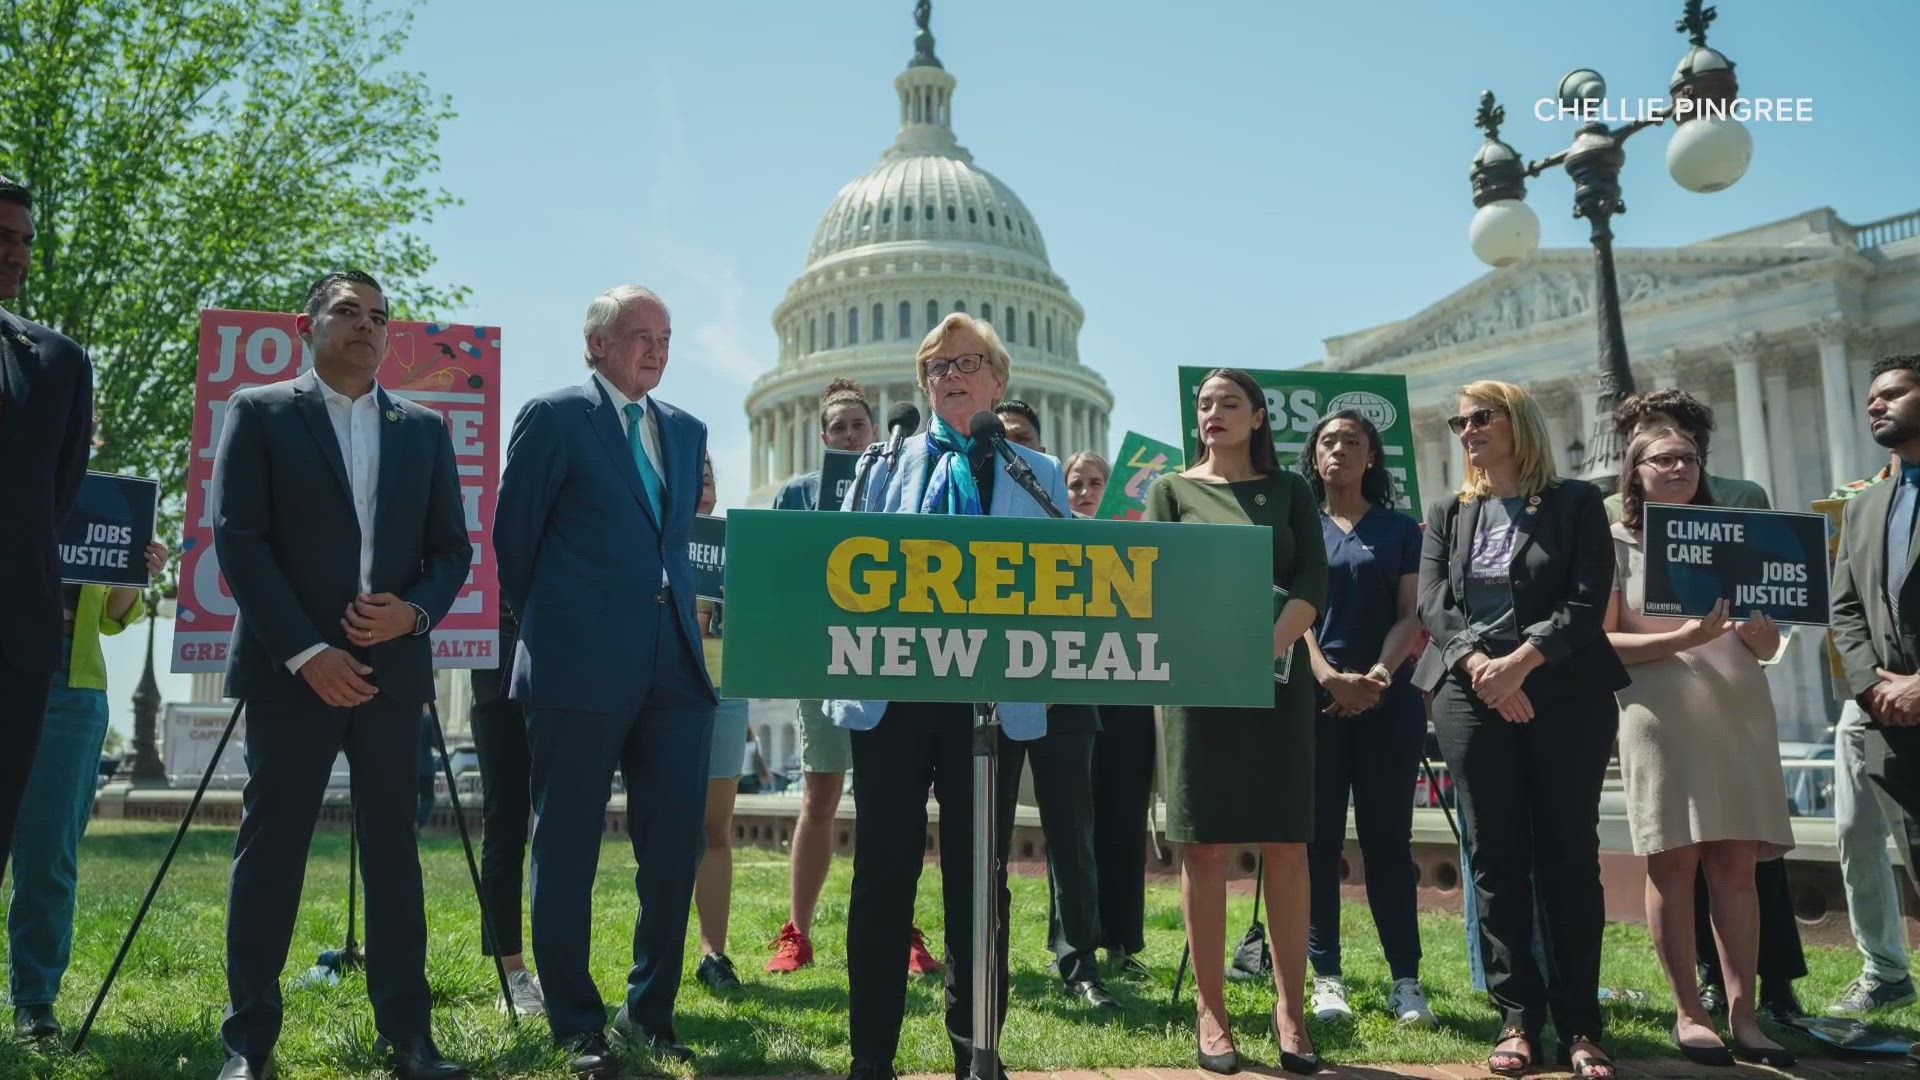 Lawmakers say it will tackle pollution and the climate crisis while also strengthening public infrastructure and bring jobs to Americans.